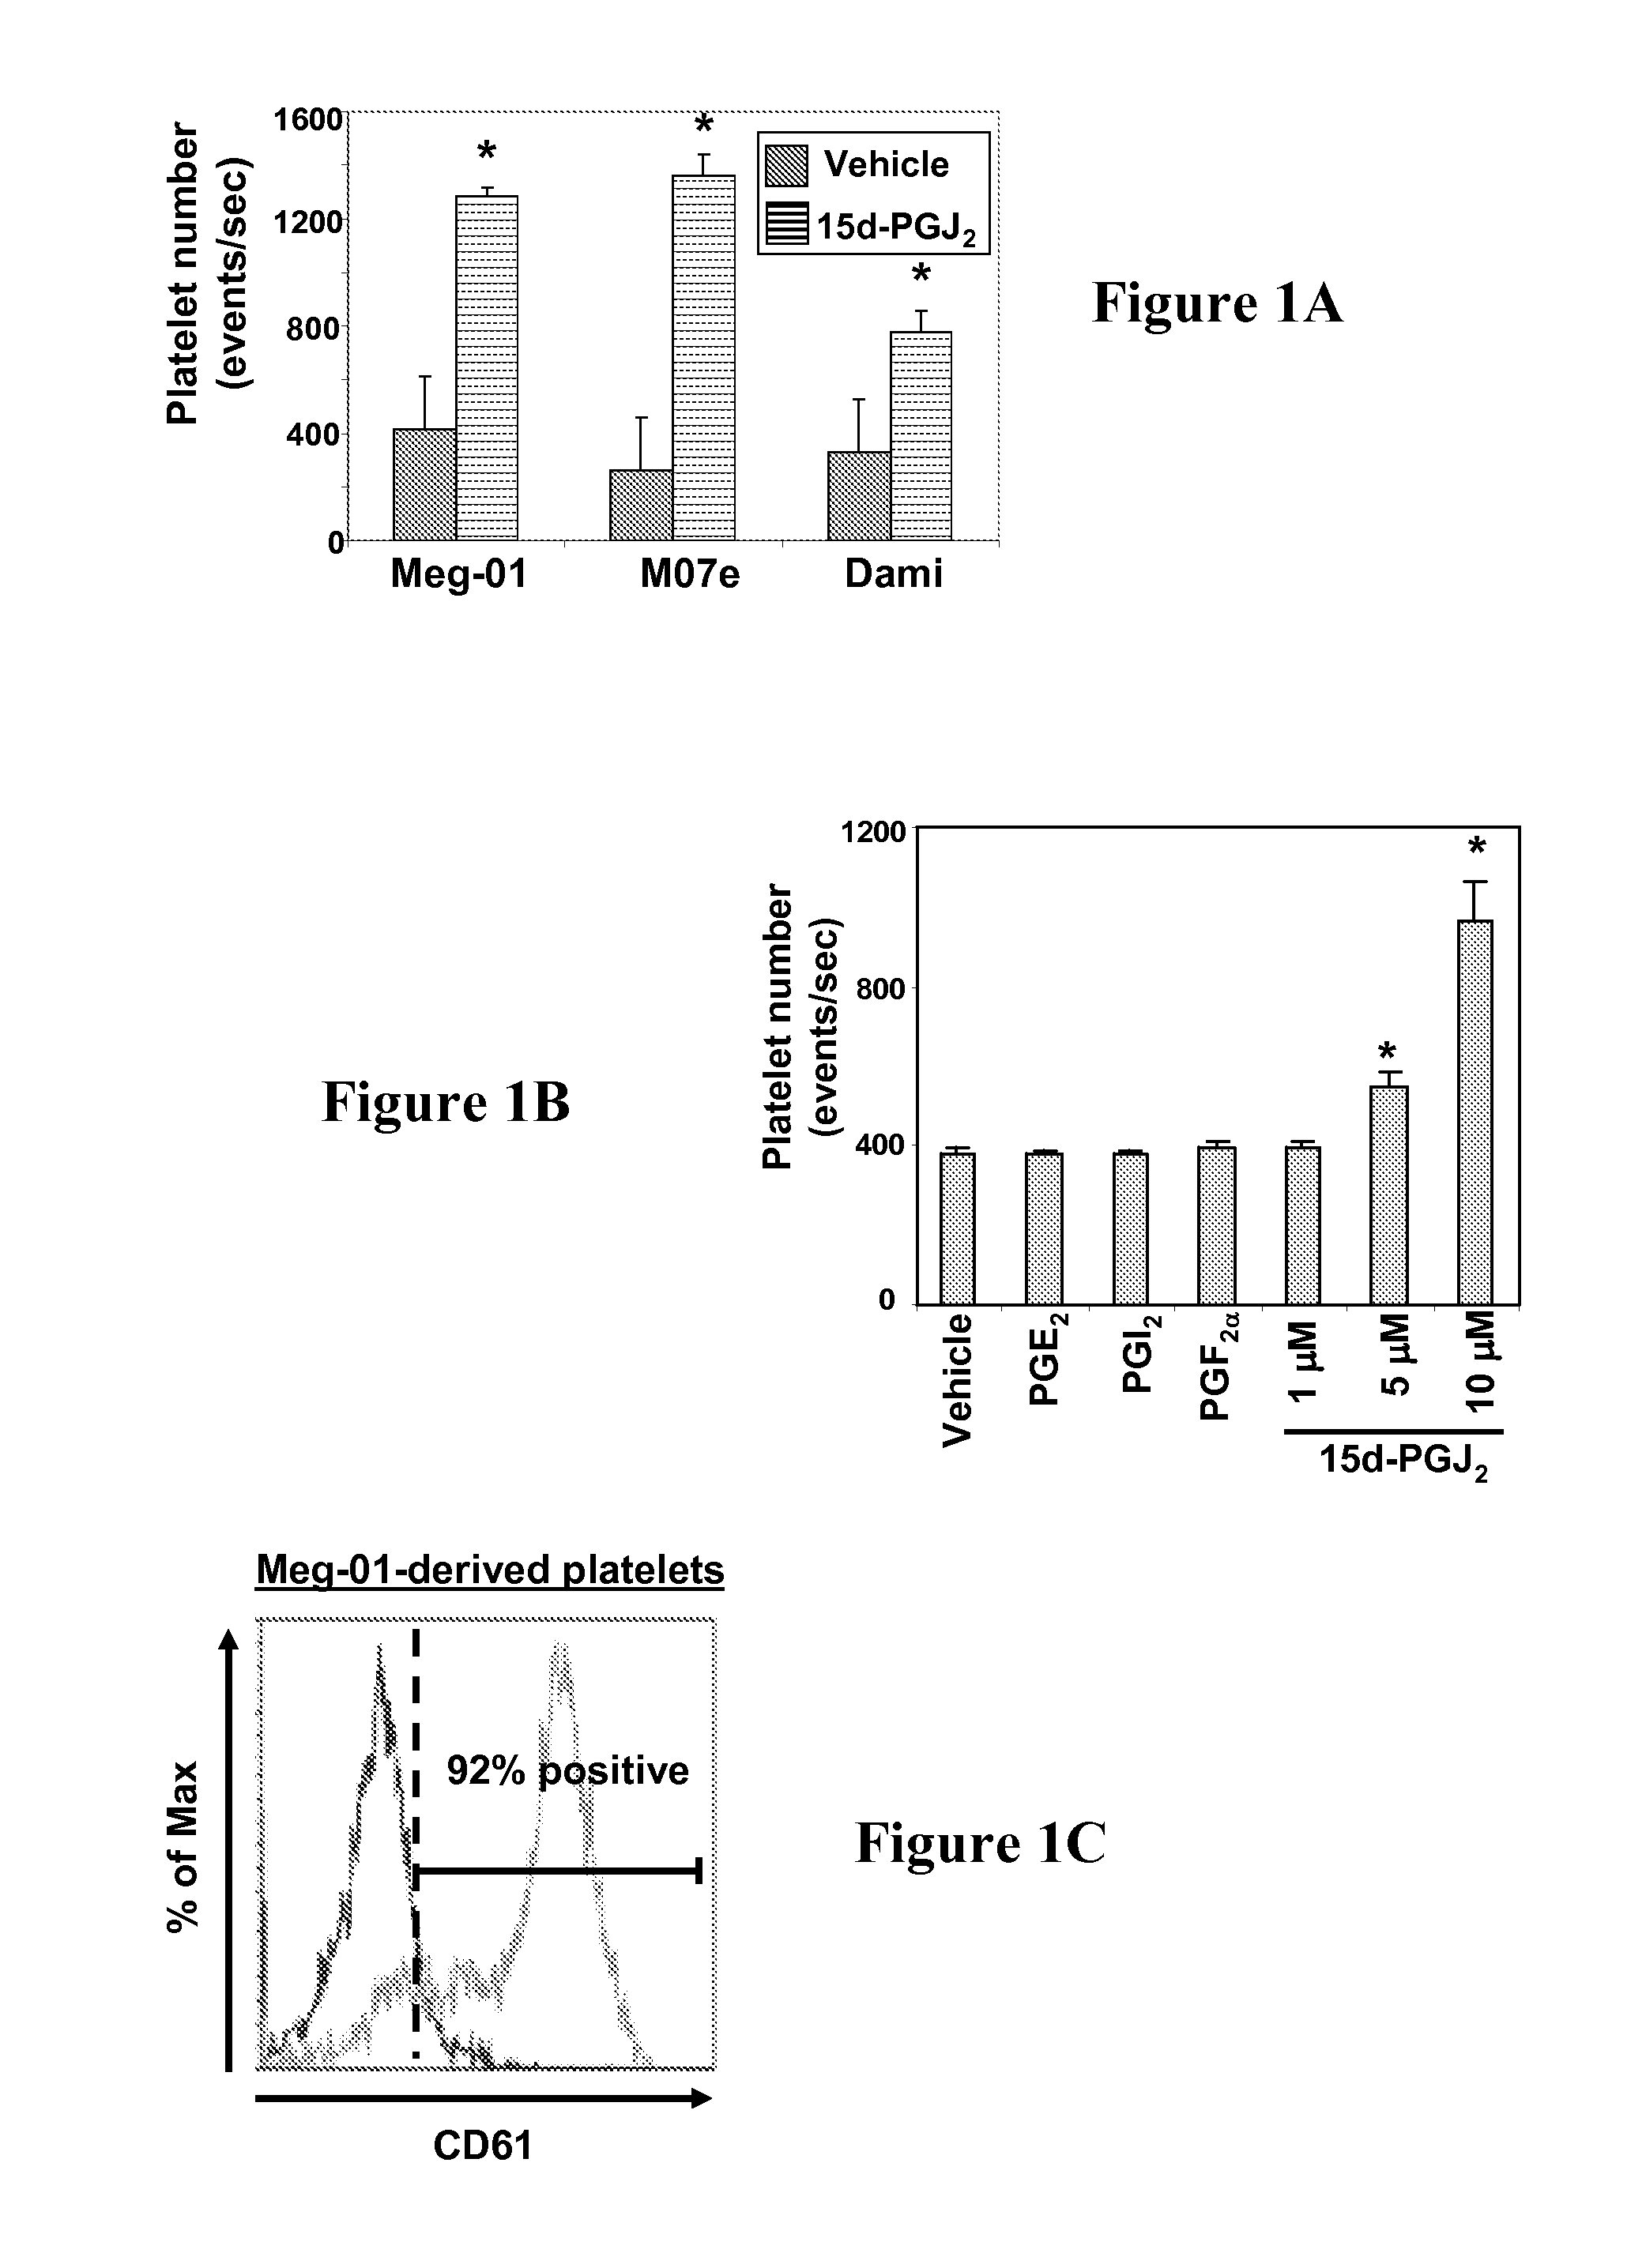 Use of electrophilic compounds for inducing platelet production or maintaining platelet function